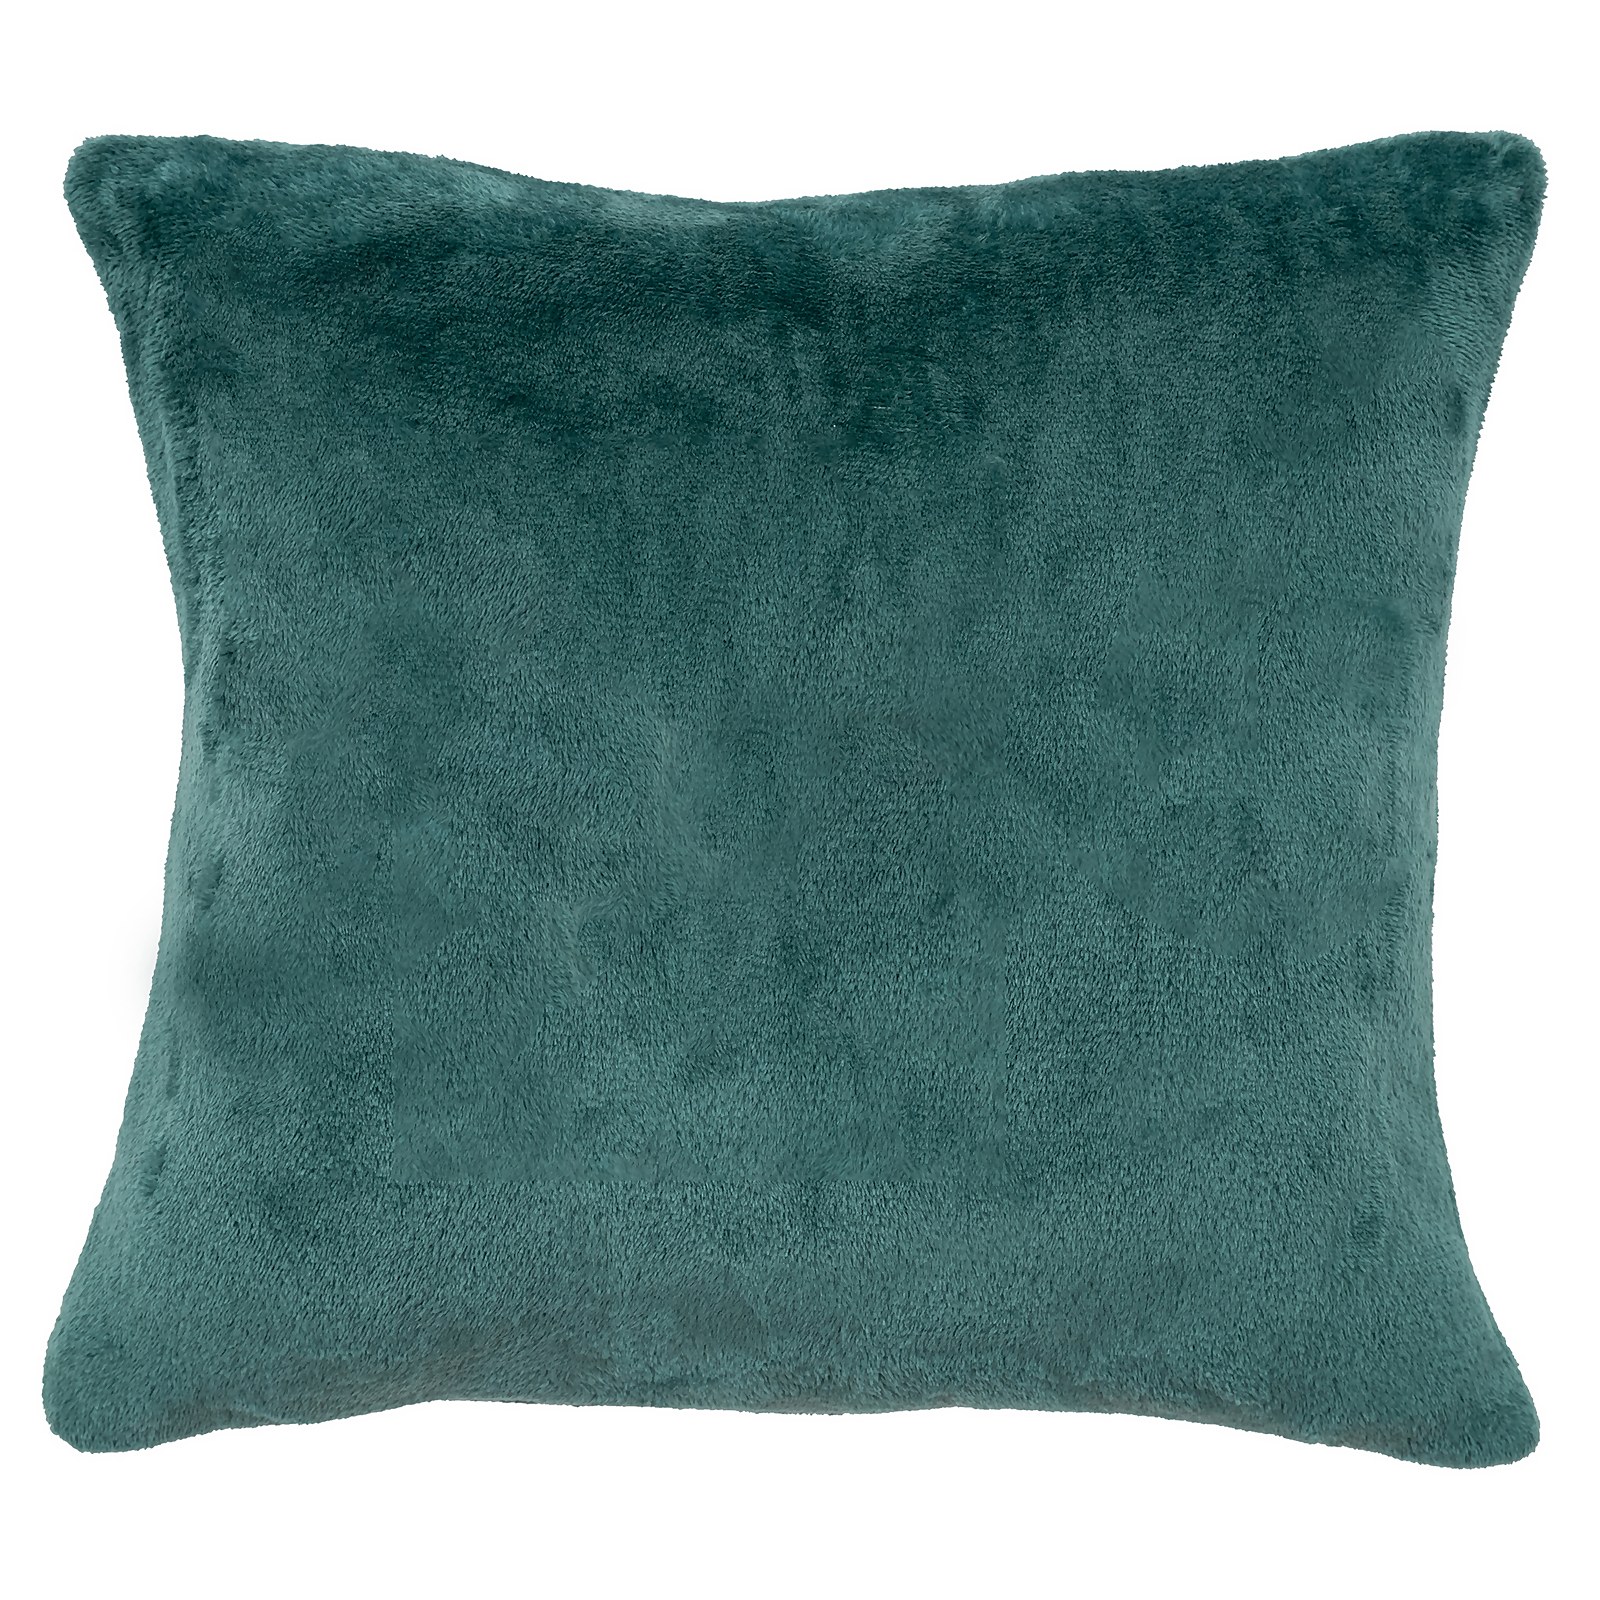 Photo of Supersoft Cushion - Forest - 43x43cm